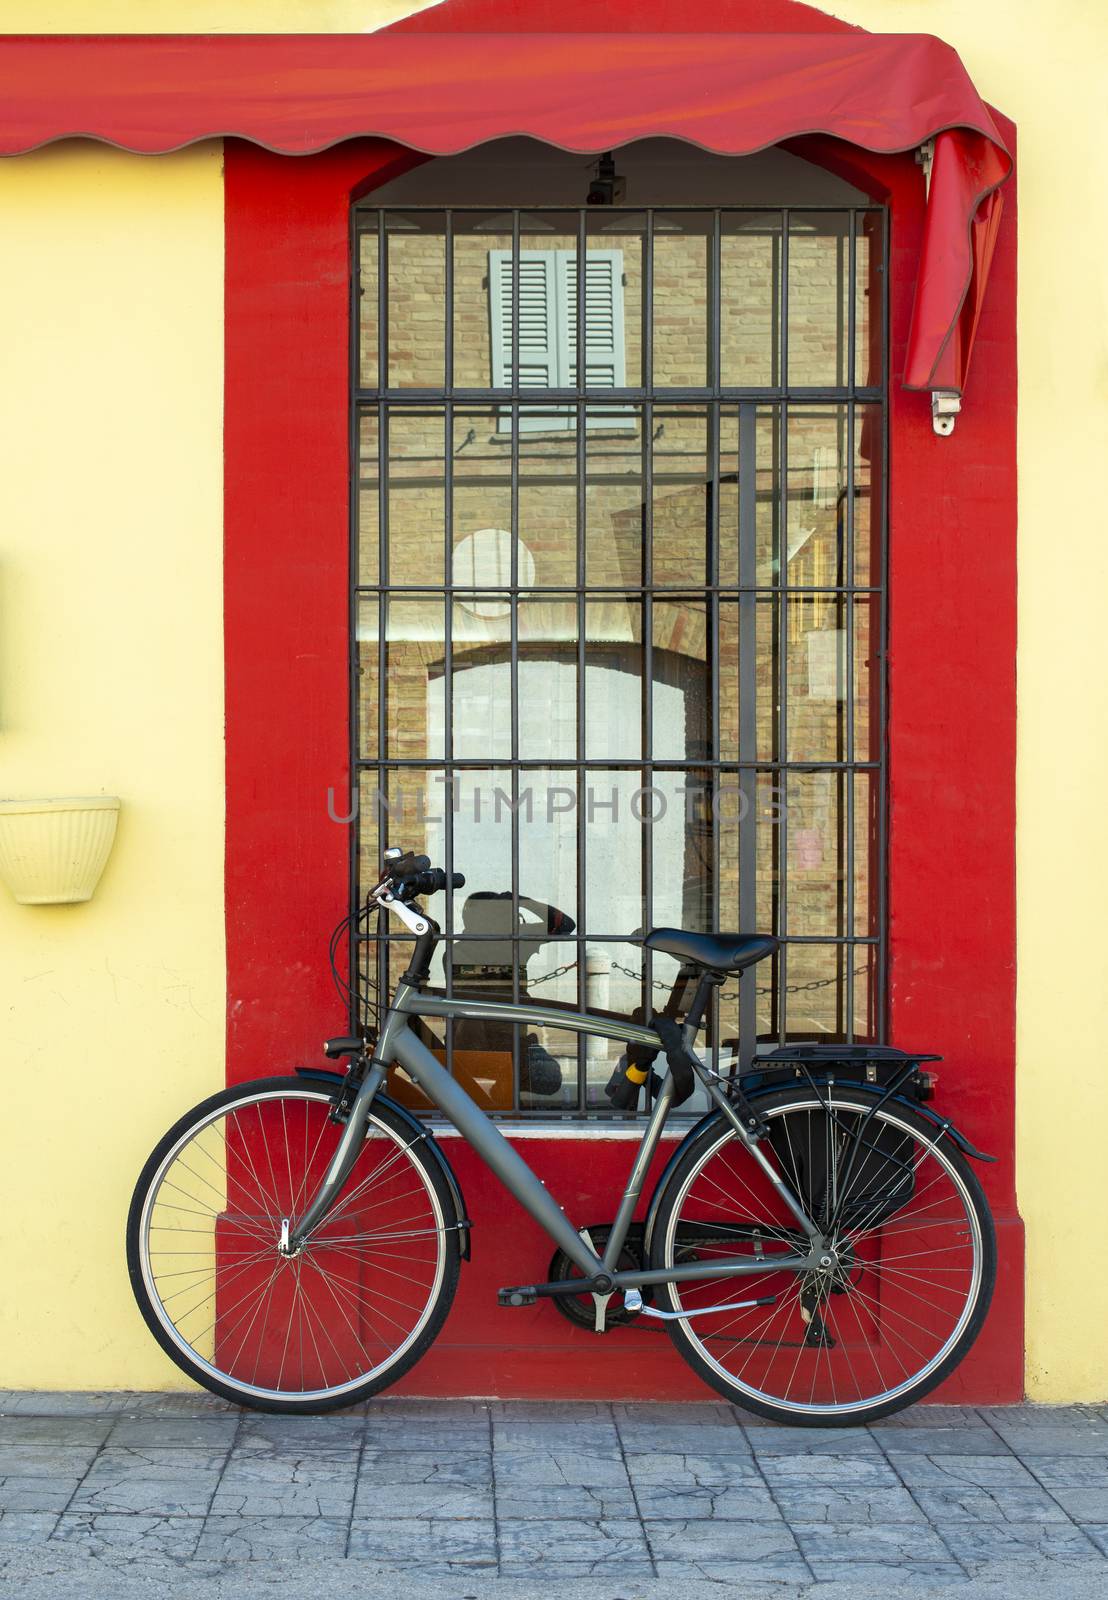 Grey bike in front of yellow facade and red window. Bicycle with trunk. Reflection of old building in the window. Window with grille. 